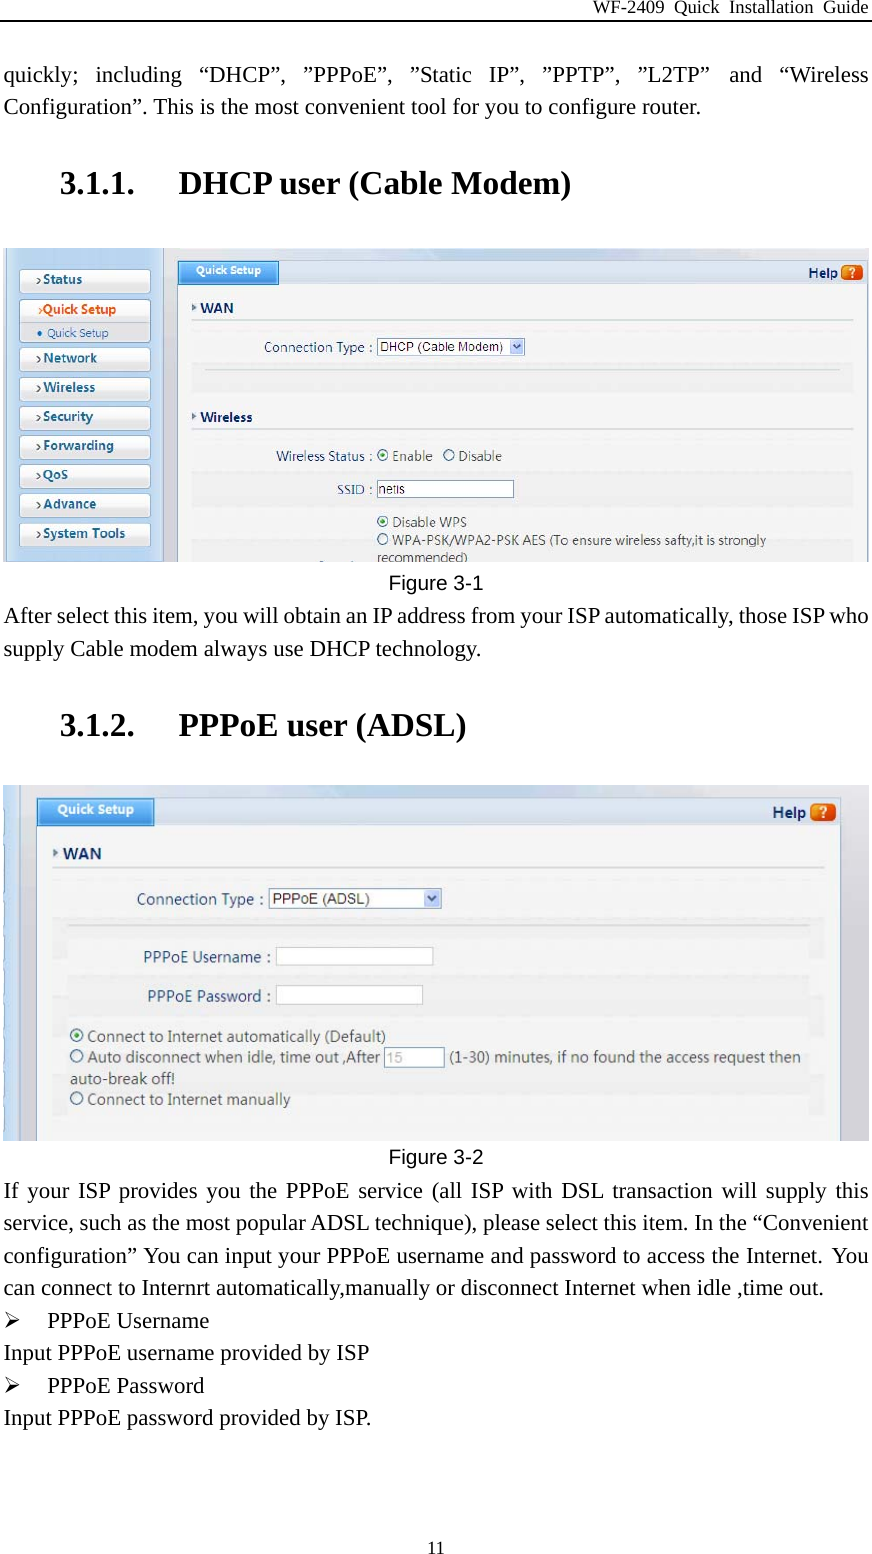 WF-2409 Quick Installation Guide  11quickly; including “DHCP”, ”PPPoE”, ”Static IP”, ”PPTP”, ”L2TP” and “Wireless Configuration”. This is the most convenient tool for you to configure router. 3.1.1. DHCP user (Cable Modem)  Figure 3-1 After select this item, you will obtain an IP address from your ISP automatically, those ISP who supply Cable modem always use DHCP technology. 3.1.2. PPPoE user (ADSL)  Figure 3-2 If your ISP provides you the PPPoE service (all ISP with DSL transaction will supply this service, such as the most popular ADSL technique), please select this item. In the “Convenient configuration” You can input your PPPoE username and password to access the Internet. You can connect to Internrt automatically,manually or disconnect Internet when idle ,time out.  PPPoE Username Input PPPoE username provided by ISP  PPPoE Password Input PPPoE password provided by ISP. 